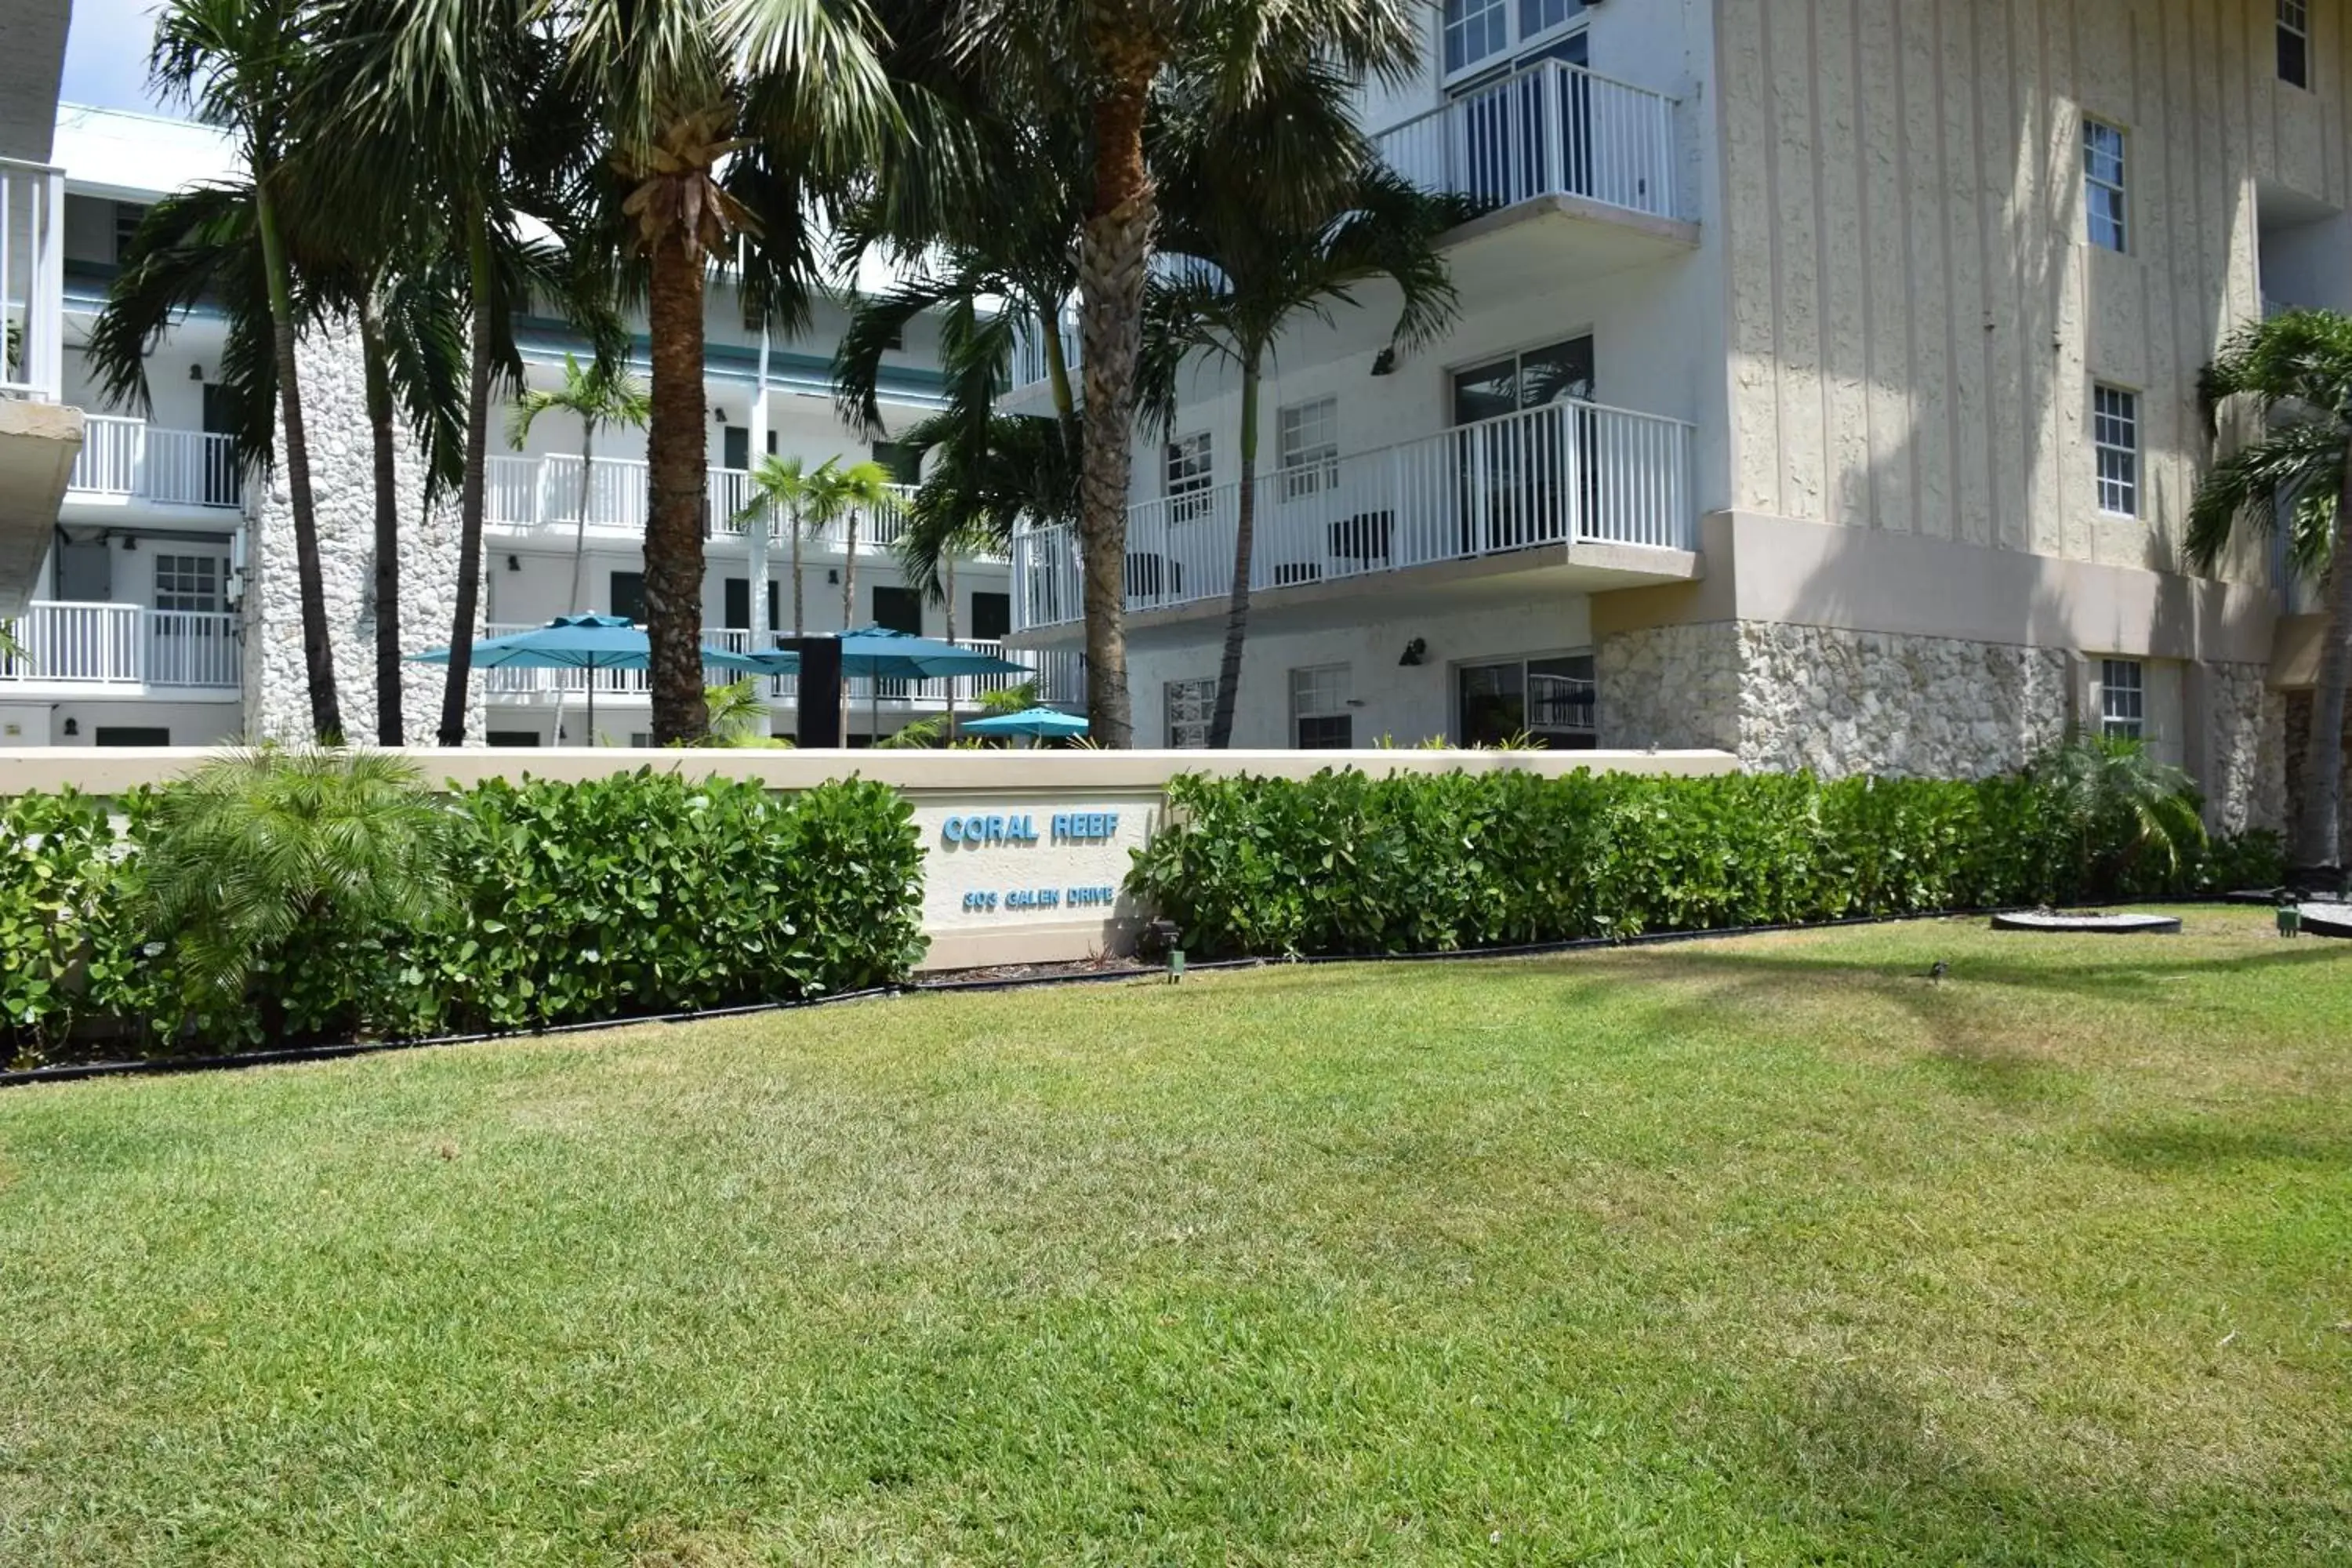 Facade/entrance, Property Building in Coral Reef at Key Biscayne